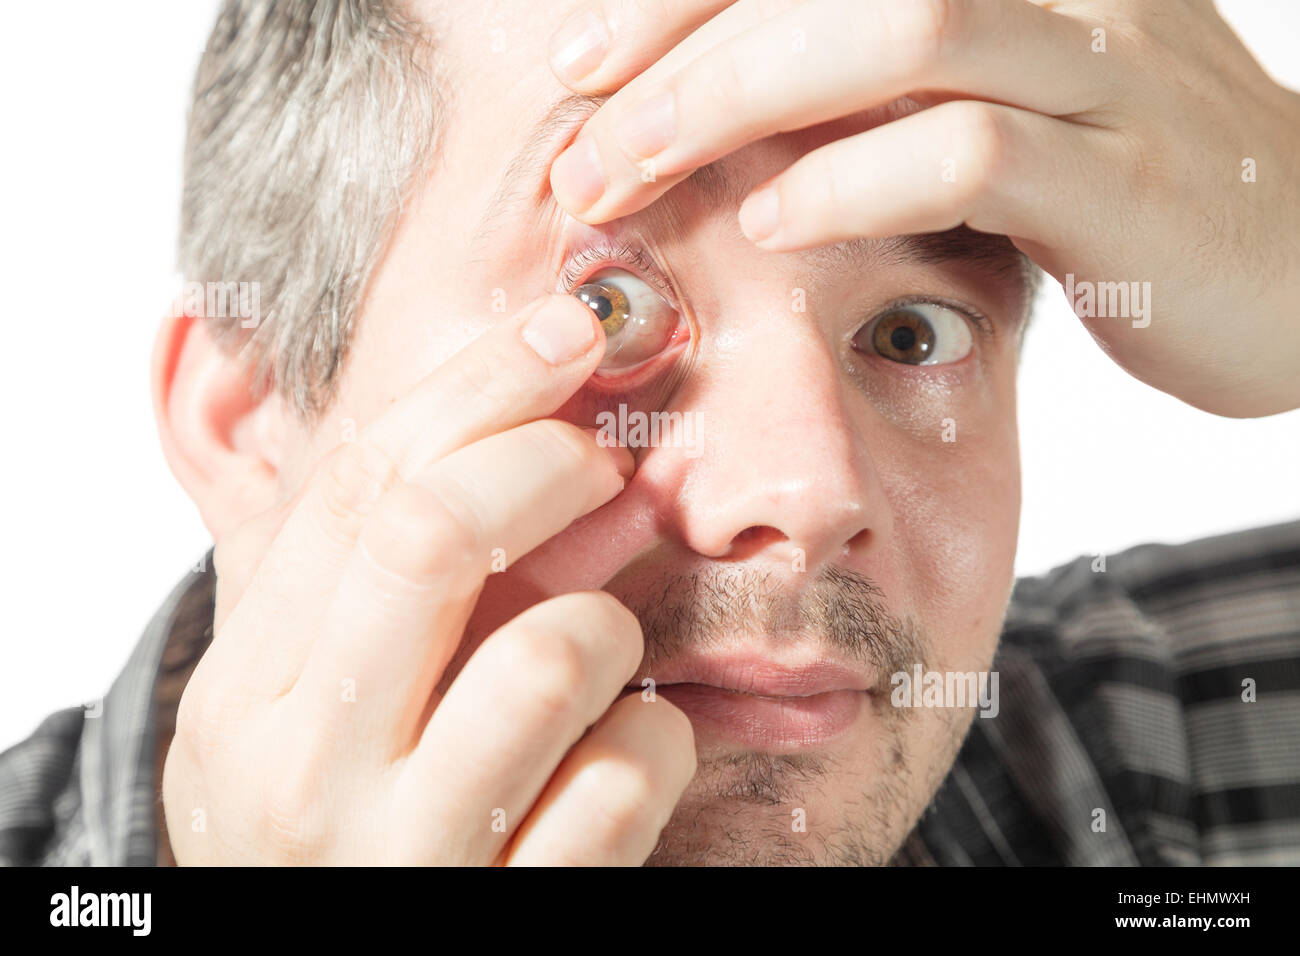 Picture of a man putting on a contact lens Stock Photo